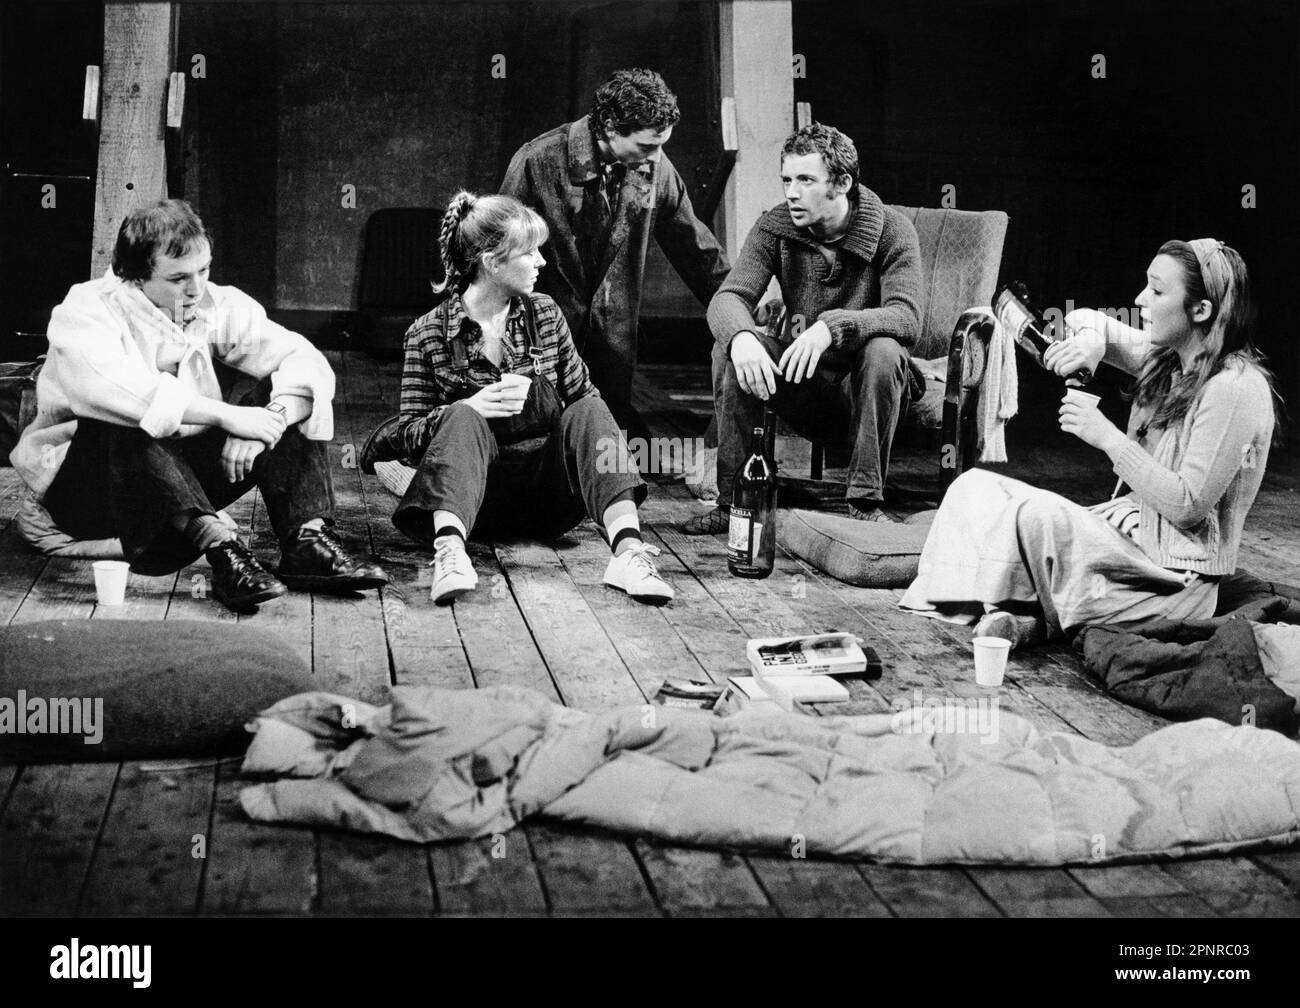 l-r: Iain Mitchell (Stephen), Jill Baker (Hazel), David Threlfall (Fitz), Charles Wegner (Olly), Lesley Manville (Ali) in SAVAGE AMUSEMENT by Peter Flannery at the Royal Shakespeare Company (RSC),The Warehouse, London WC2  05/07/1978  design: Chris Dyer  lighting: Brian Wigney  director: John Caird Stock Photo